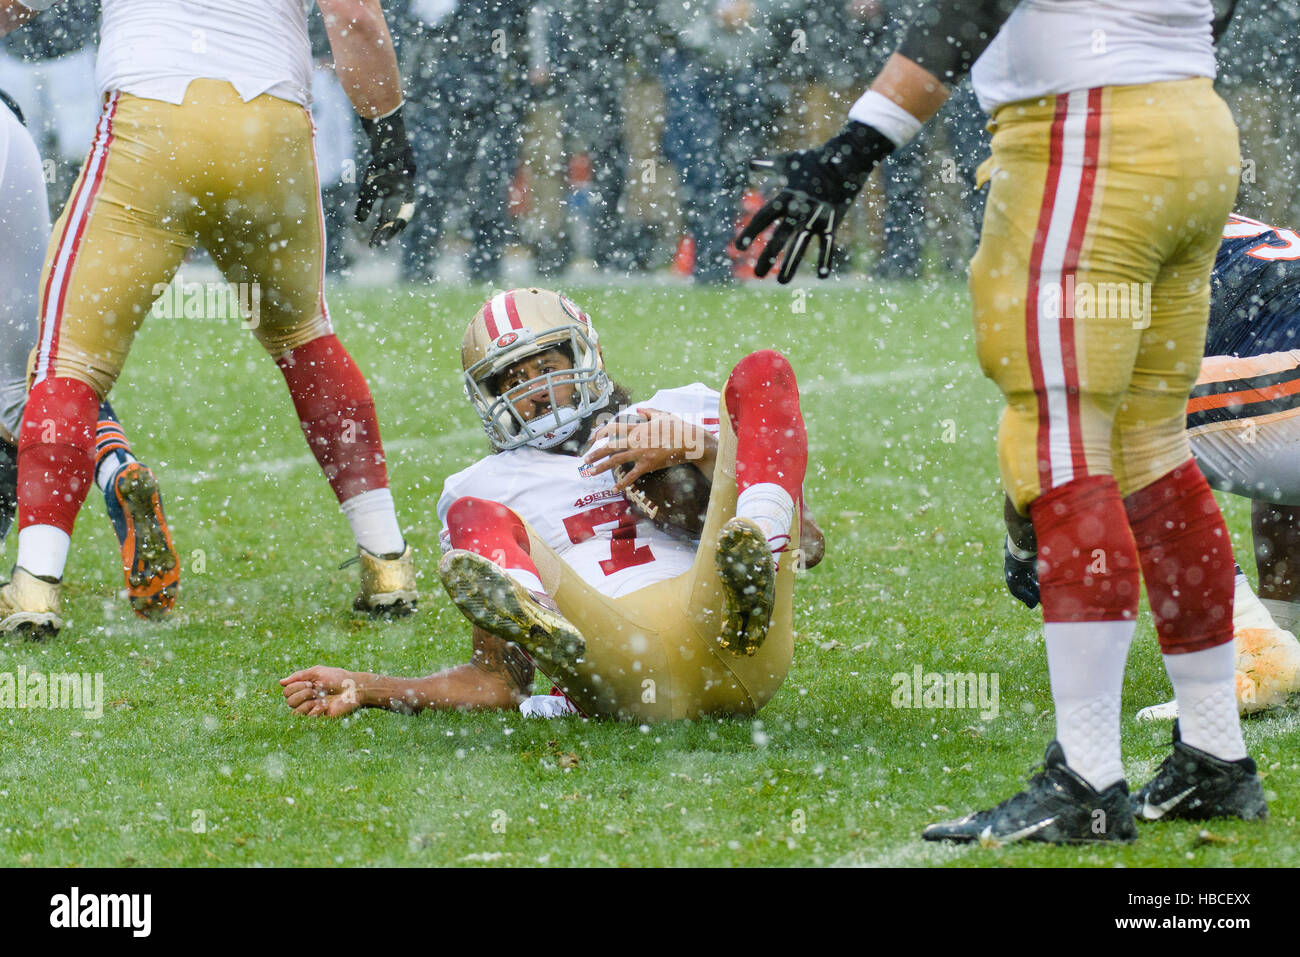 Chicago, USA. 4th December, 2016. San Francisco 49ers Quarterback Colin Kaepernick (7) on the ground after being sacked in the 1st quarter during an NFL football game between the San Francisco 49ers and the Chicago Bears at Soldier Field in Chicago, IL. © Action Plus Sports Images/Alamy Live News Stock Photo